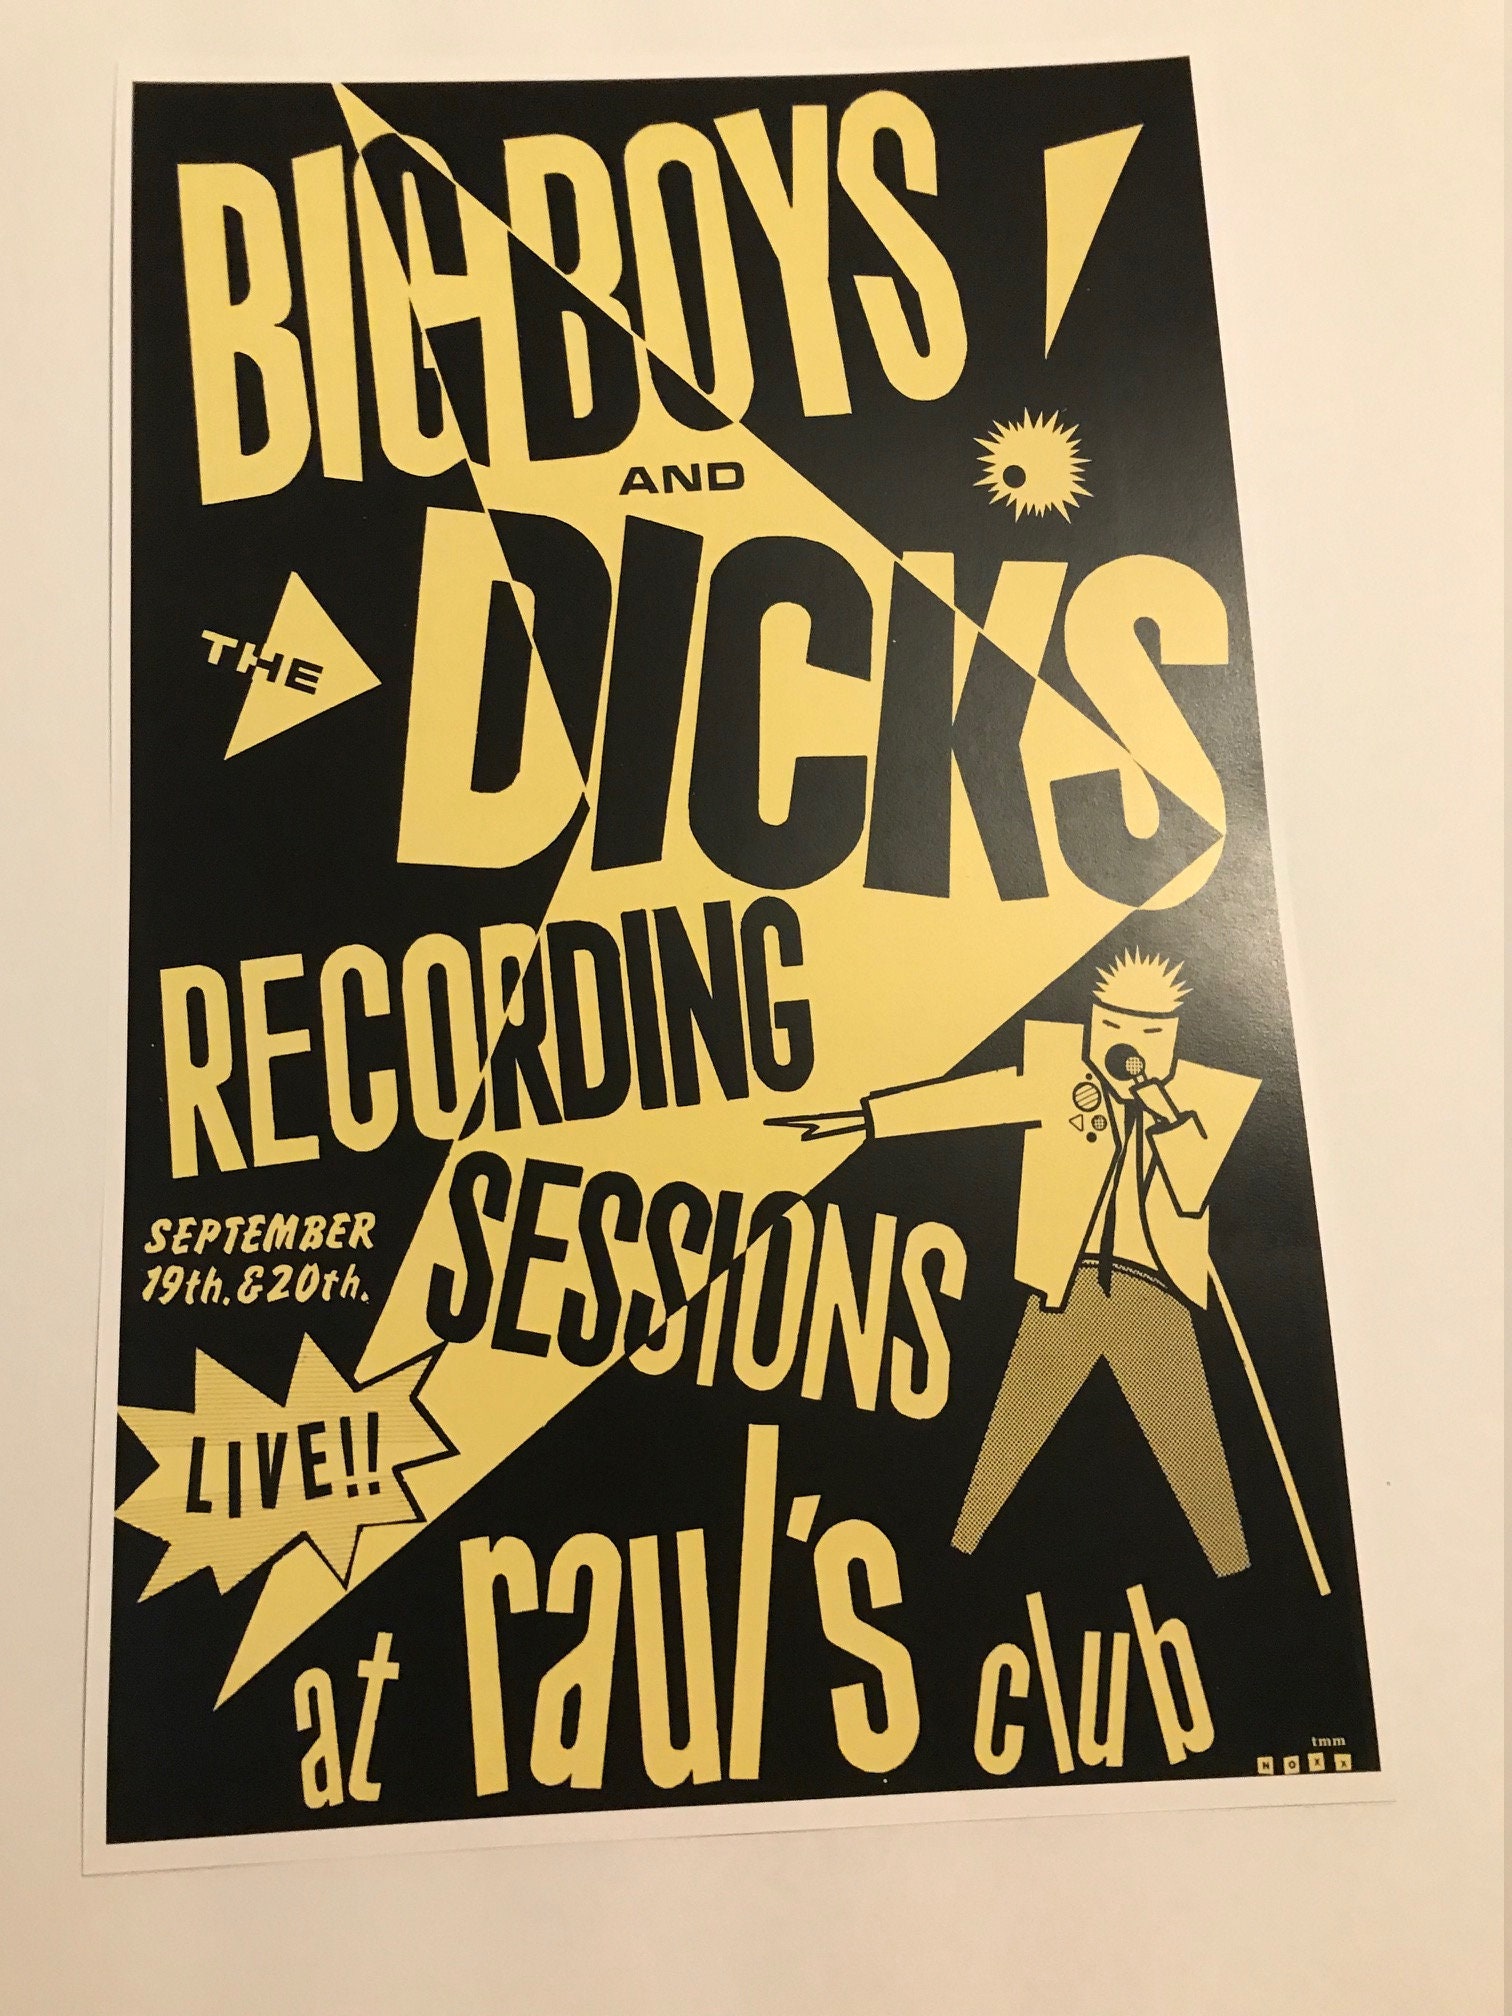 Big Boys and The Dicks Live at Raul's show poster Ausin Etsy 日本